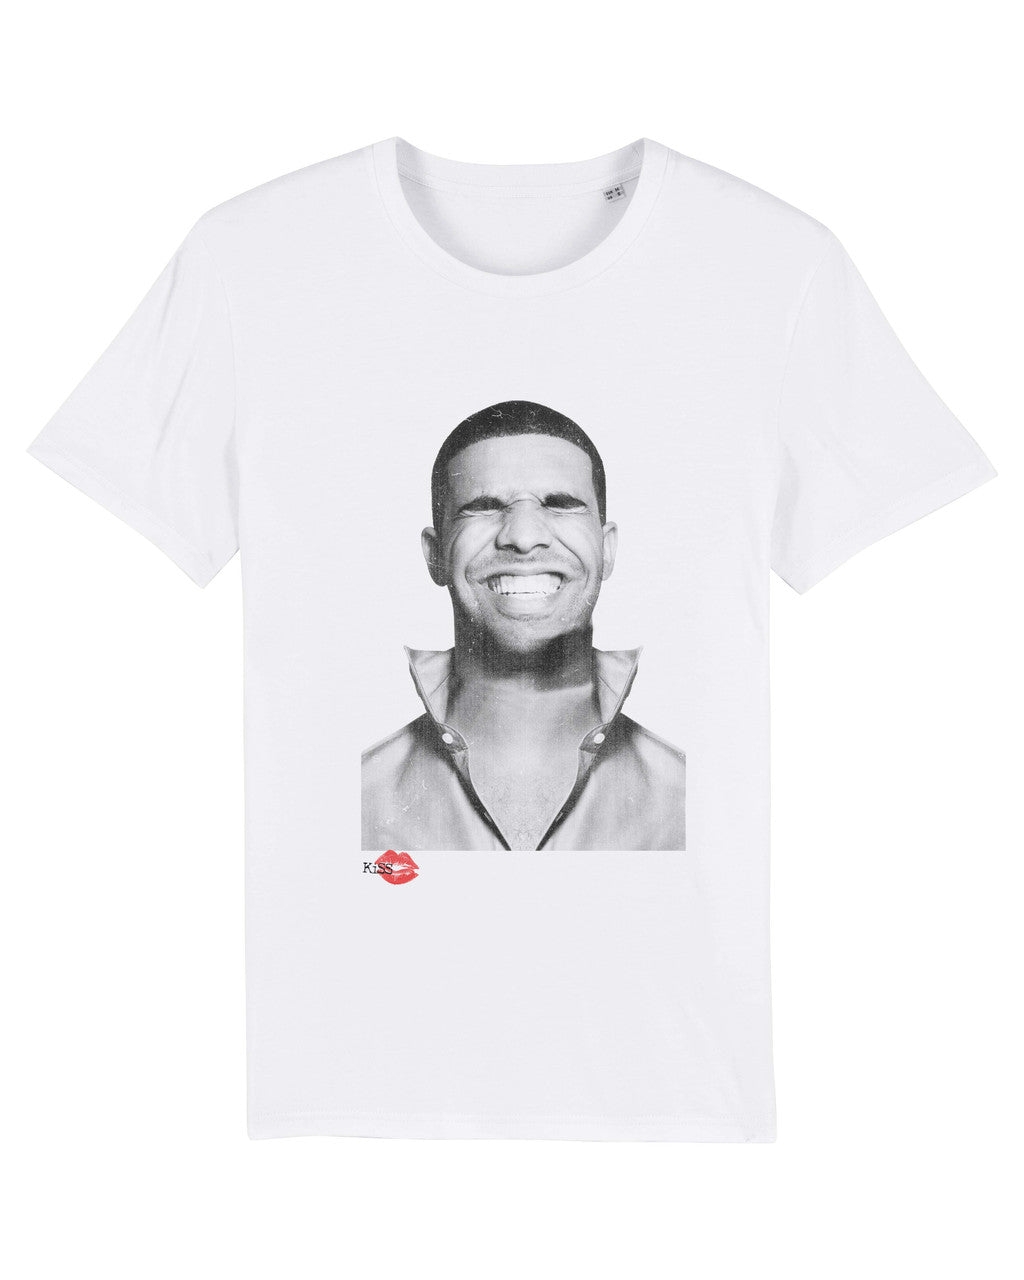 Drake KiSS T-Shirt - Smiling - Music Rap - Aubrey Graham - Drizzy - Nothing Was the Same